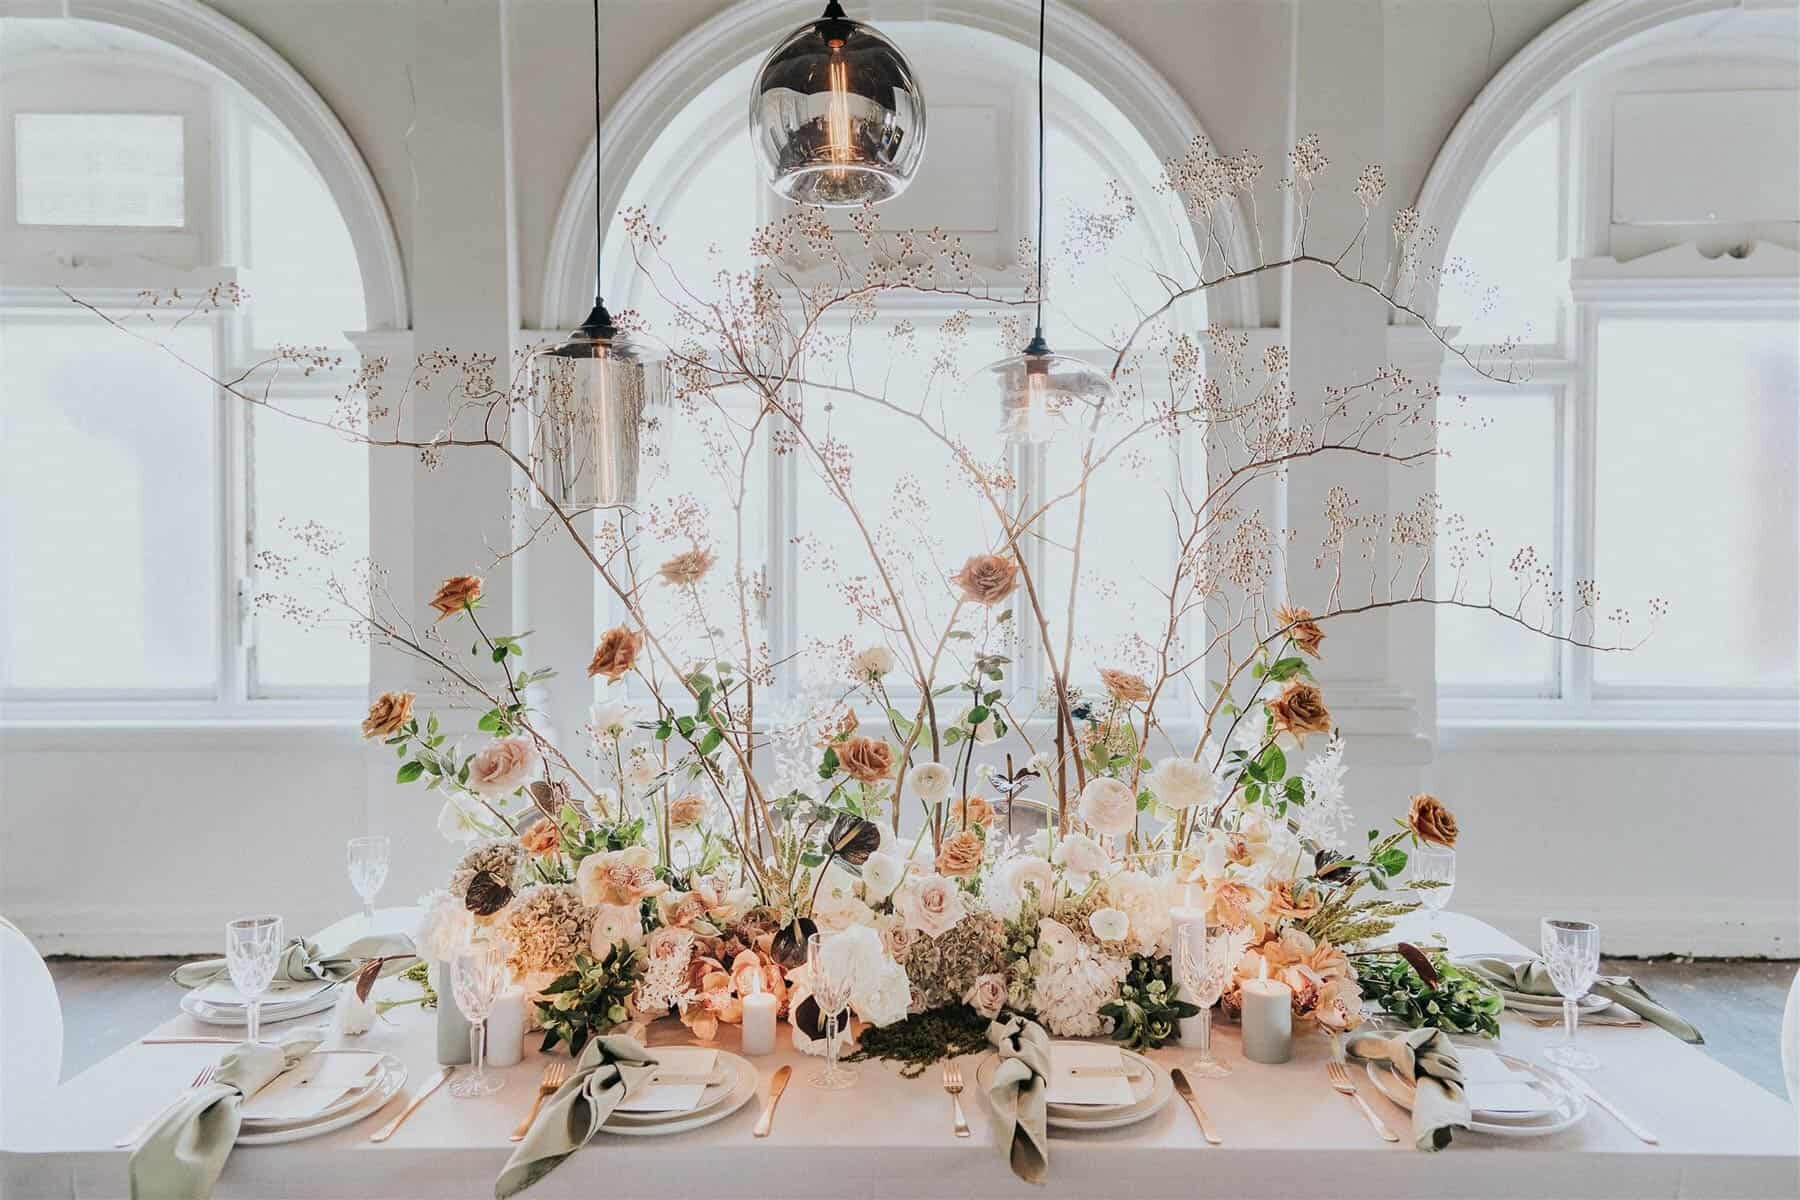 floral tablescape with hanging pendant lights